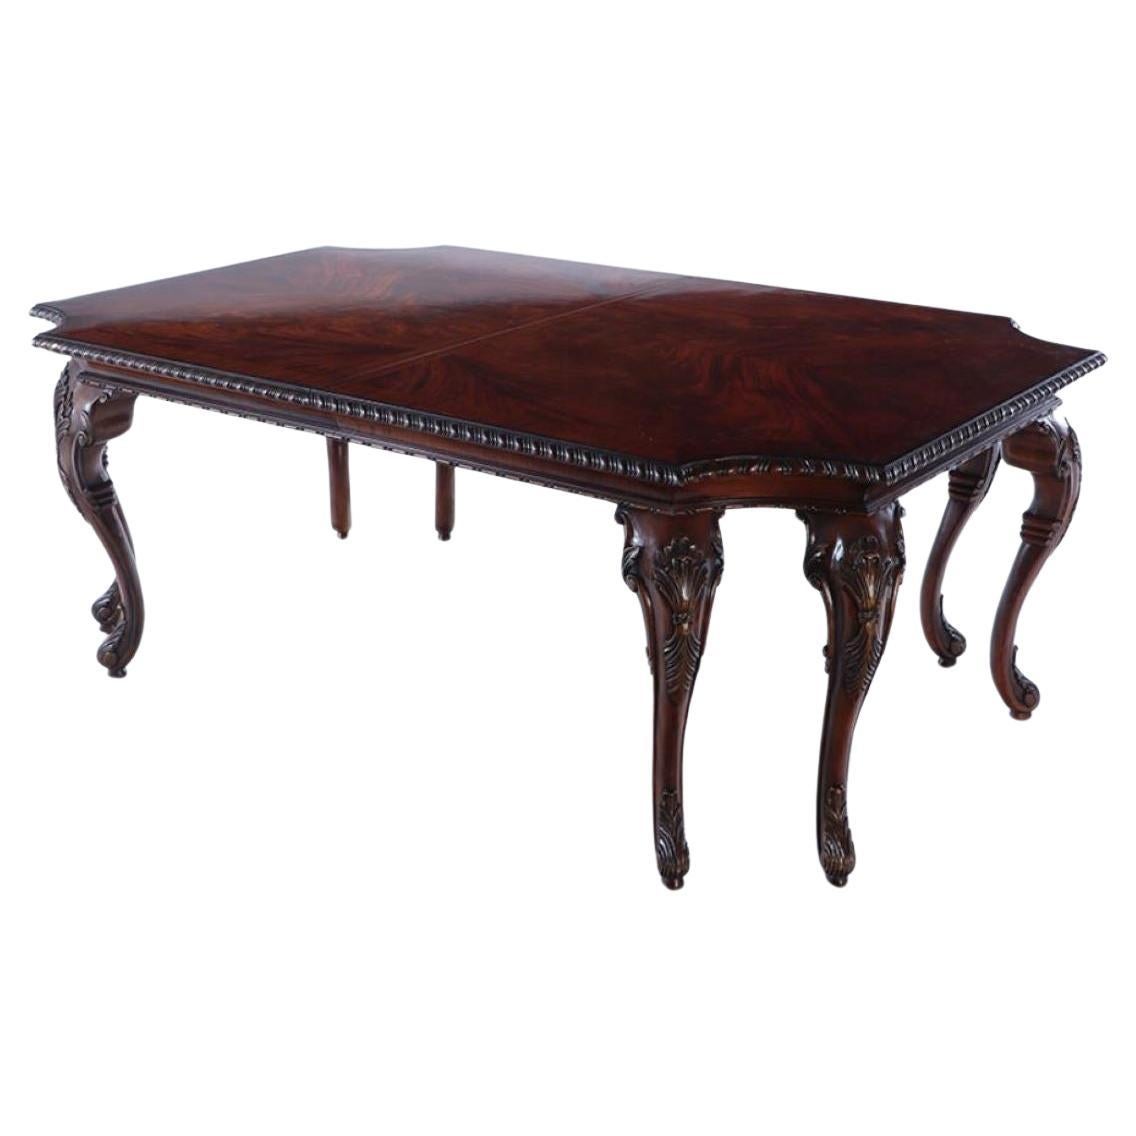 A Georgian style carved mahogany dining table by Century. 